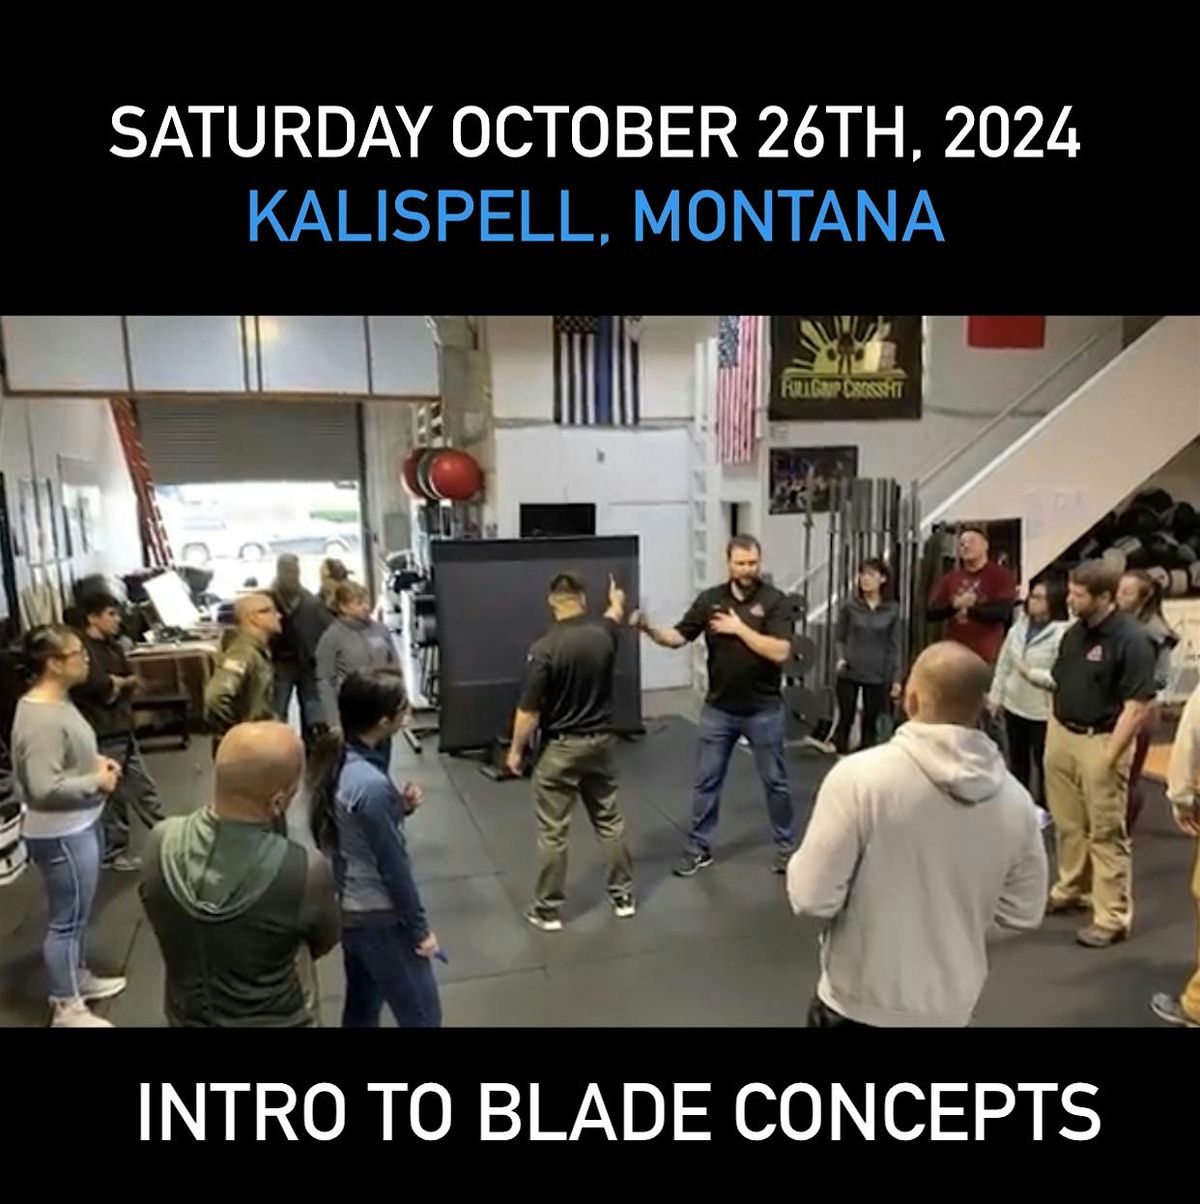 Into to Blade Concepts for Self Defense KALISPELL